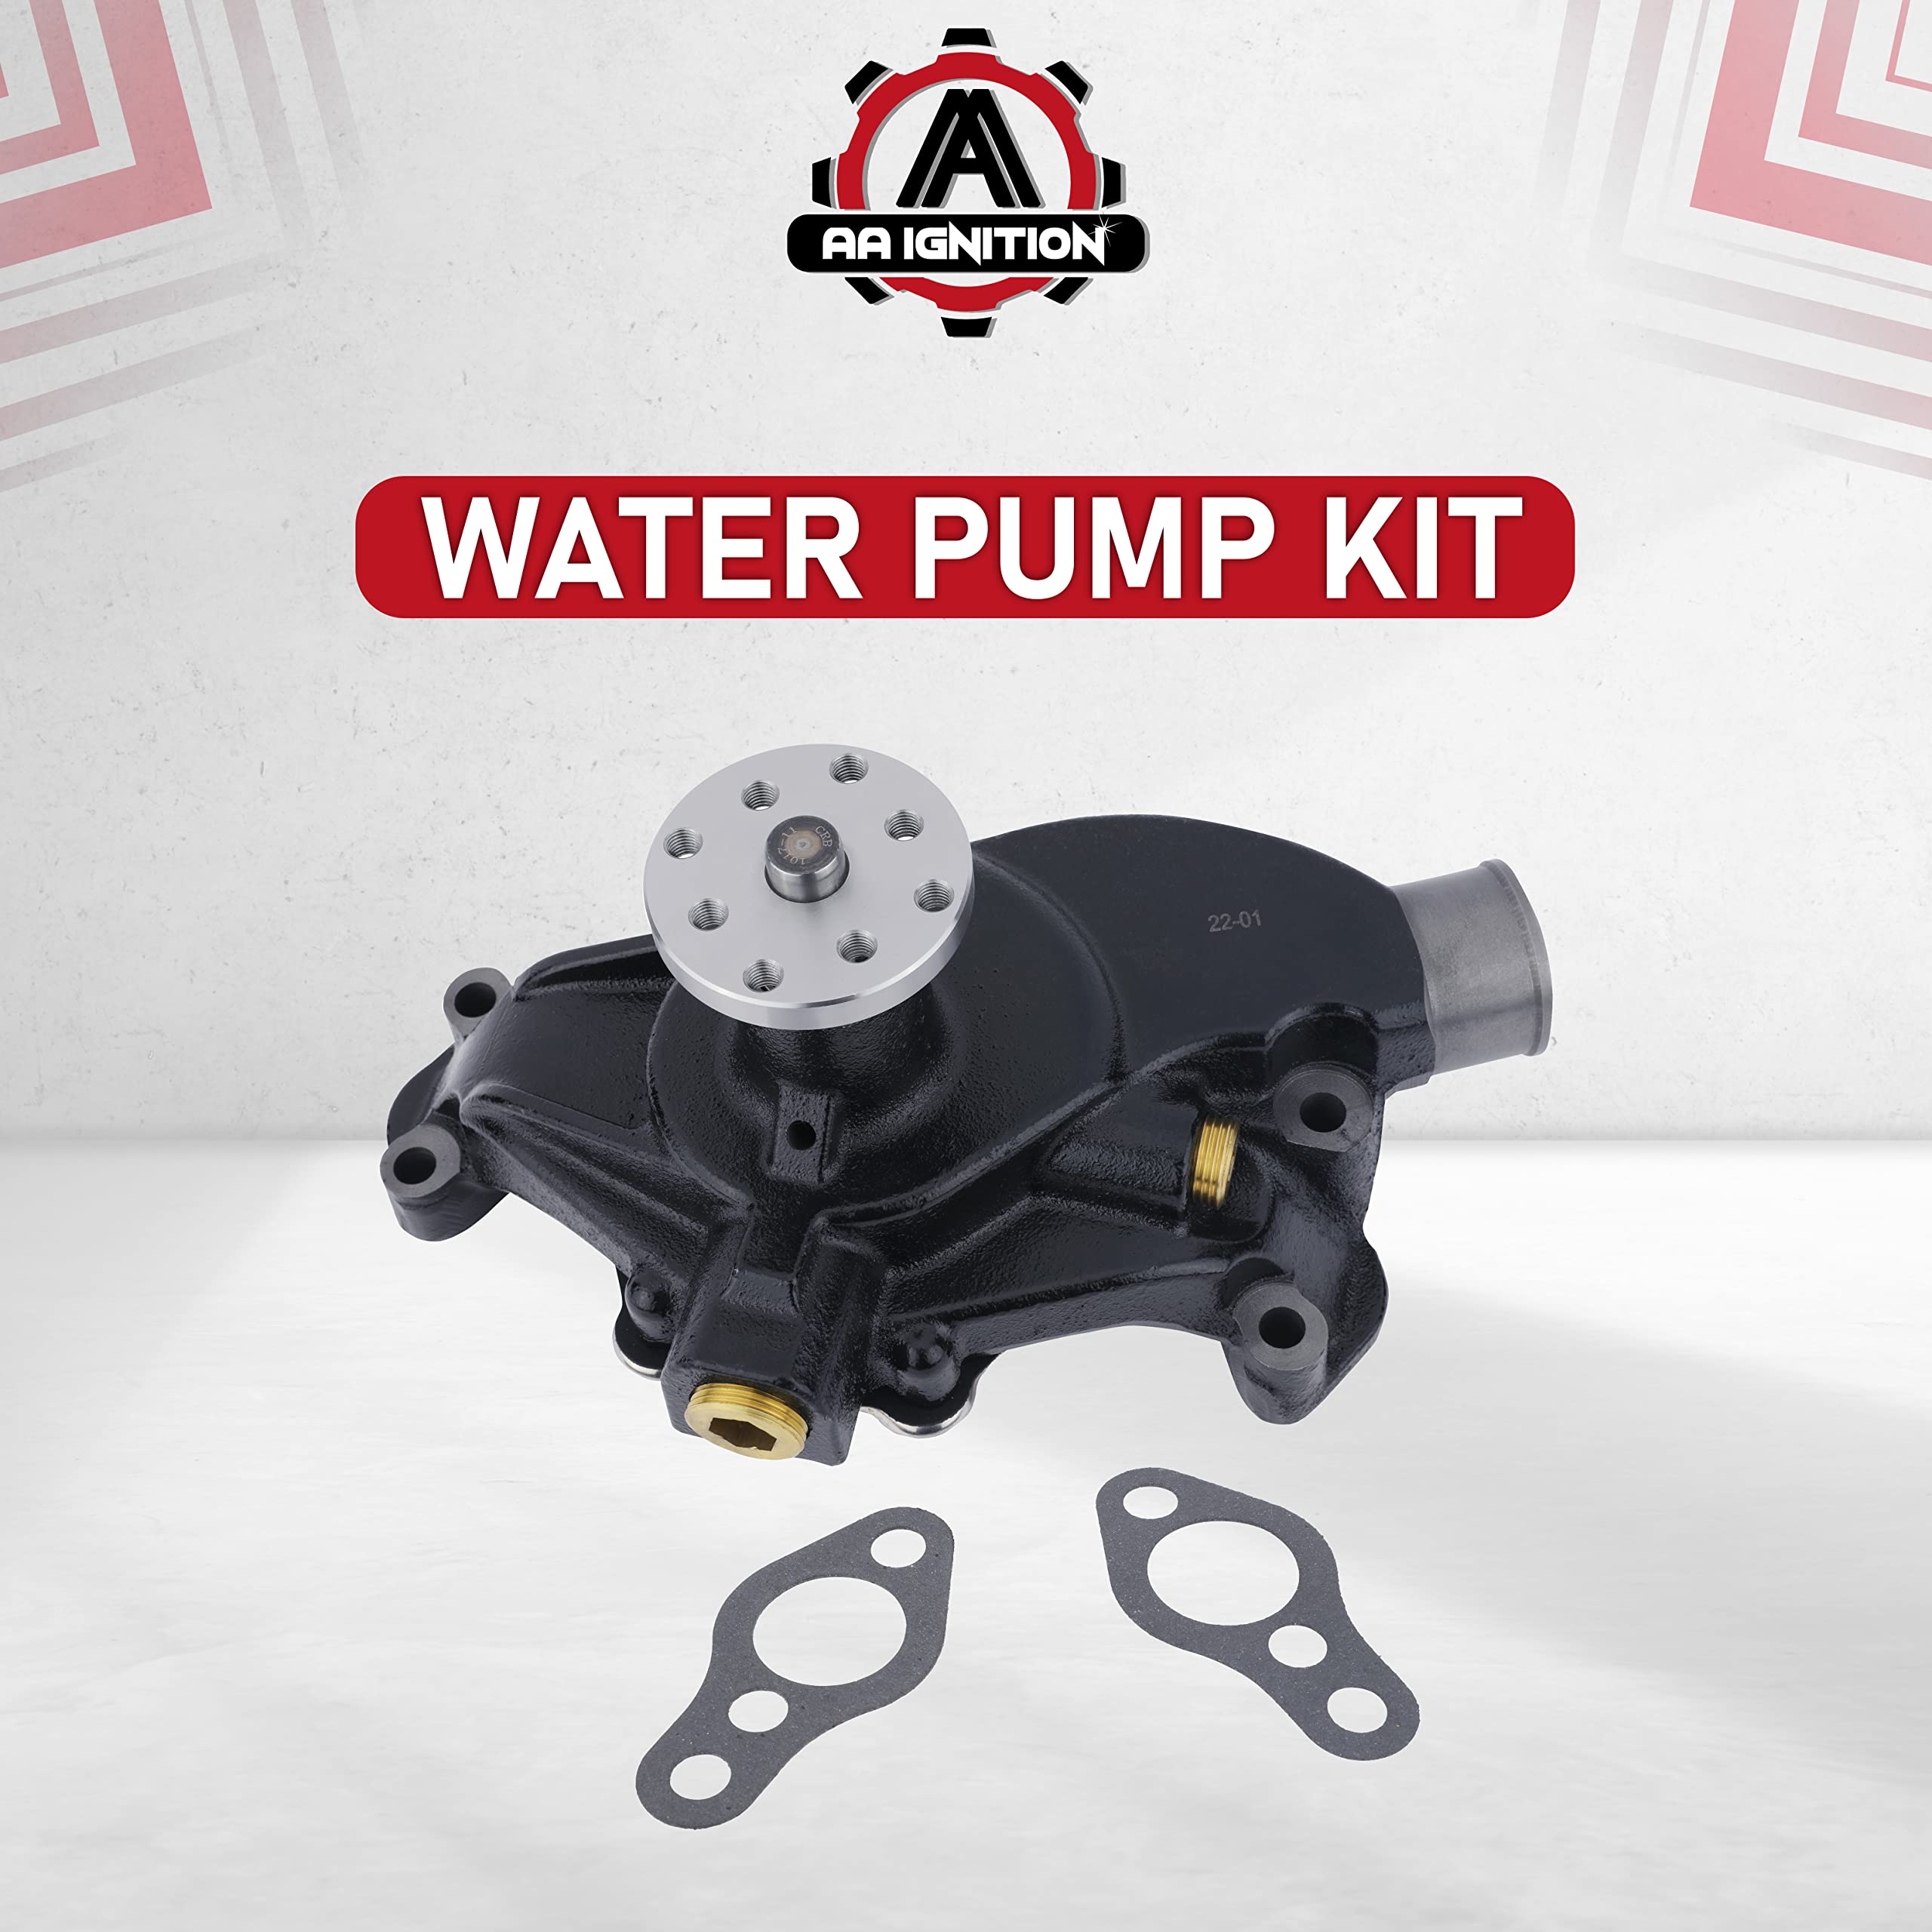 Replacement Water Pump Kit - Compatible with Mercruiser, Stern Drive, Volvo Penta, 1968-1998 OMC, Chrysler and Indmar - Inboard Engines - Replaces 8M0113734, 18-3599-2, 15201, 9-42606, 8503991  - Like New